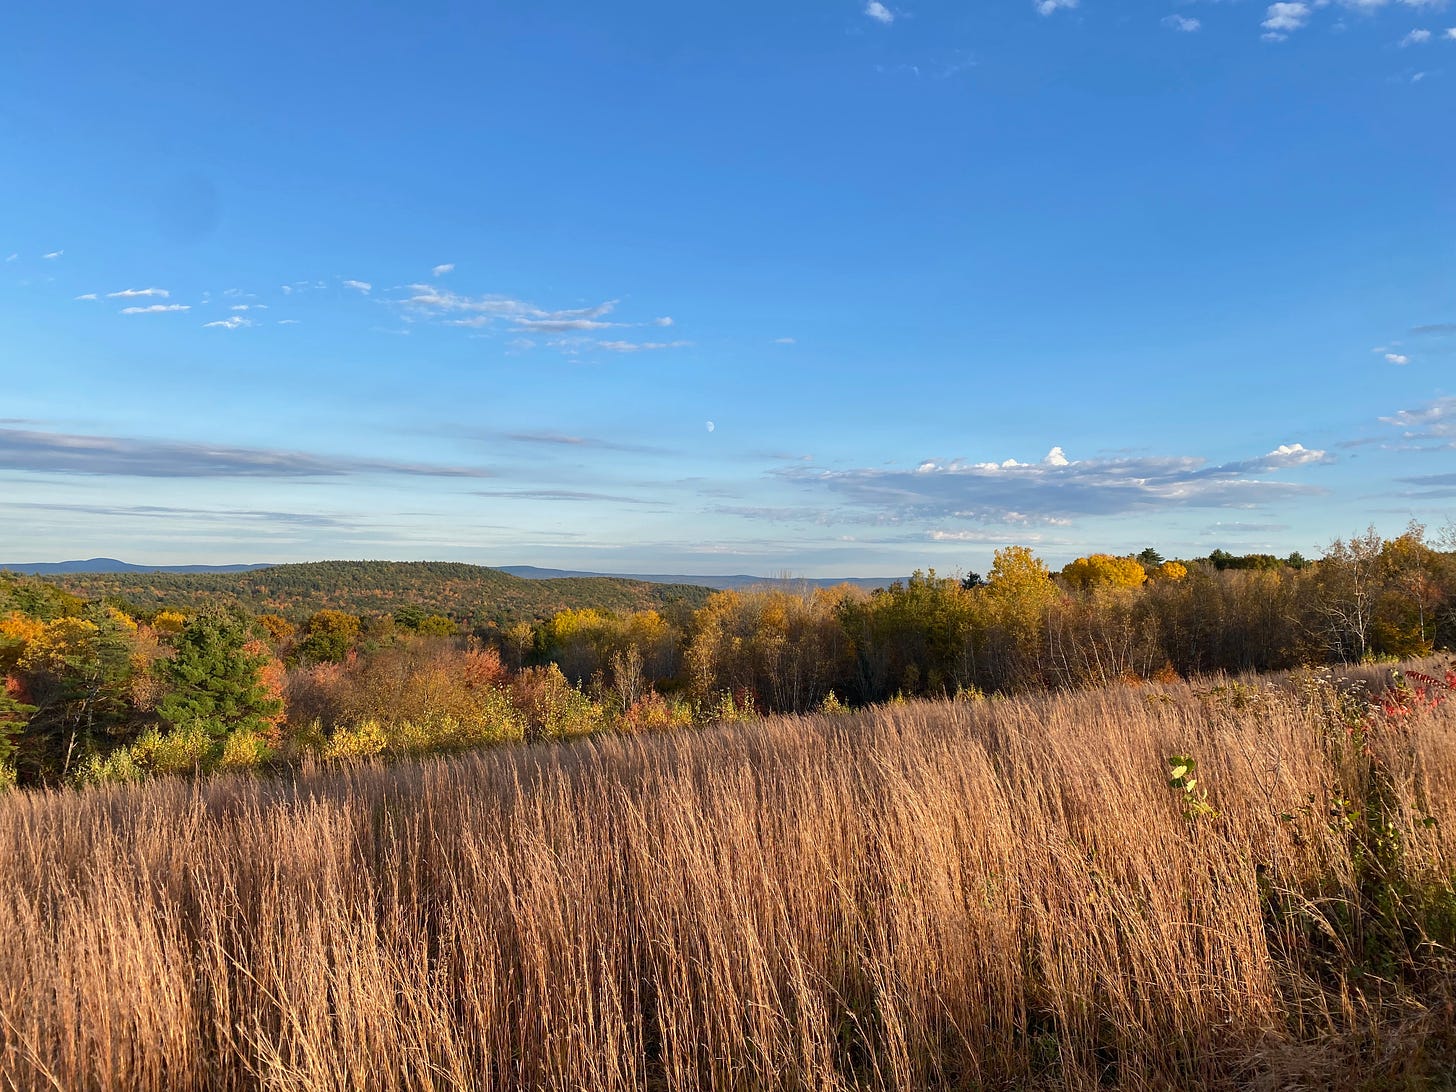 View of a hilltop meadow of brown grasses lit up with late afternoon light. Behind the meadow, hills of fall foliage under a sharp blue sky.